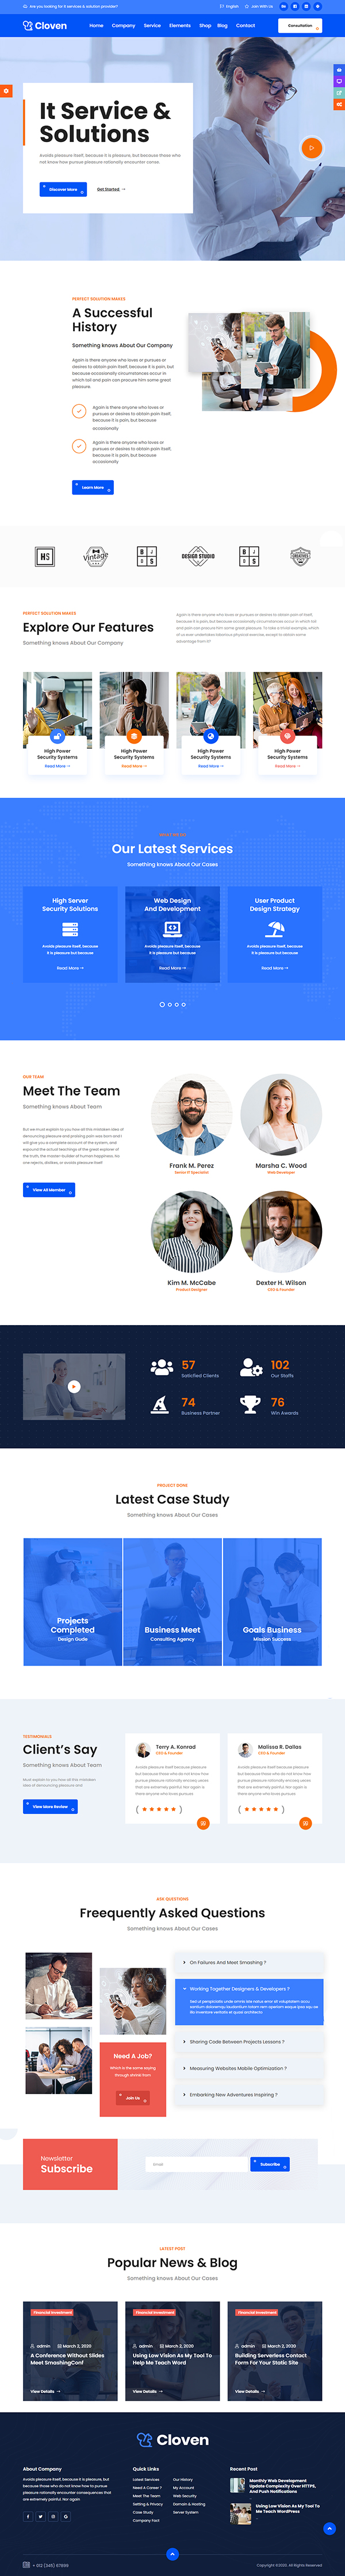 Cloven - IT Solutions Services Company WordPress Theme